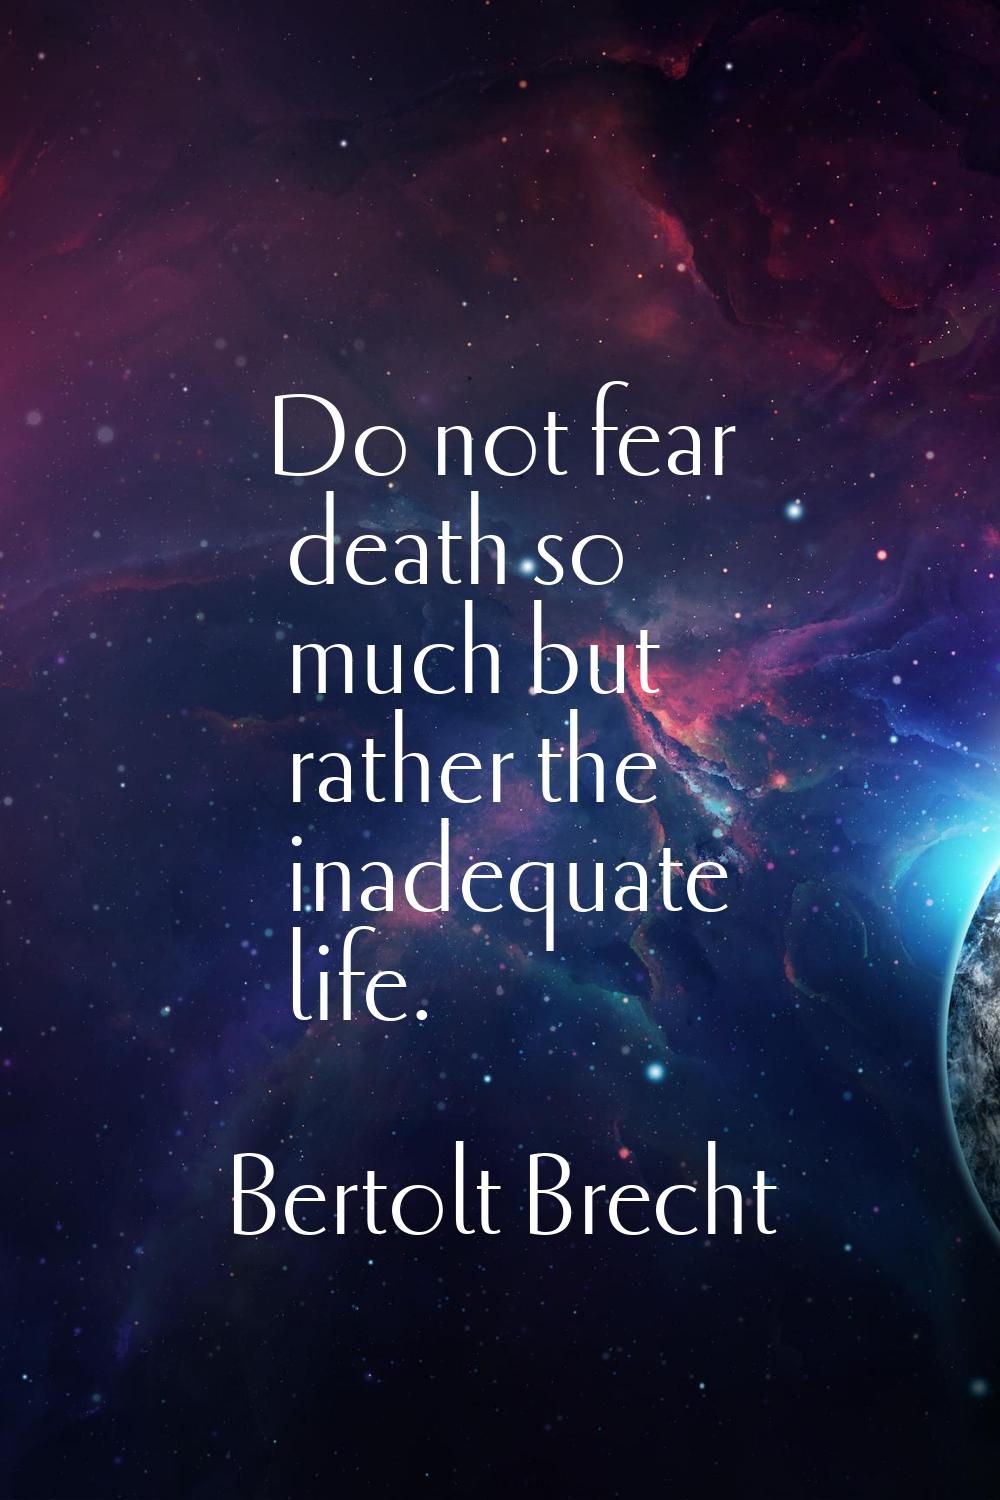 Do not fear death so much but rather the inadequate life.